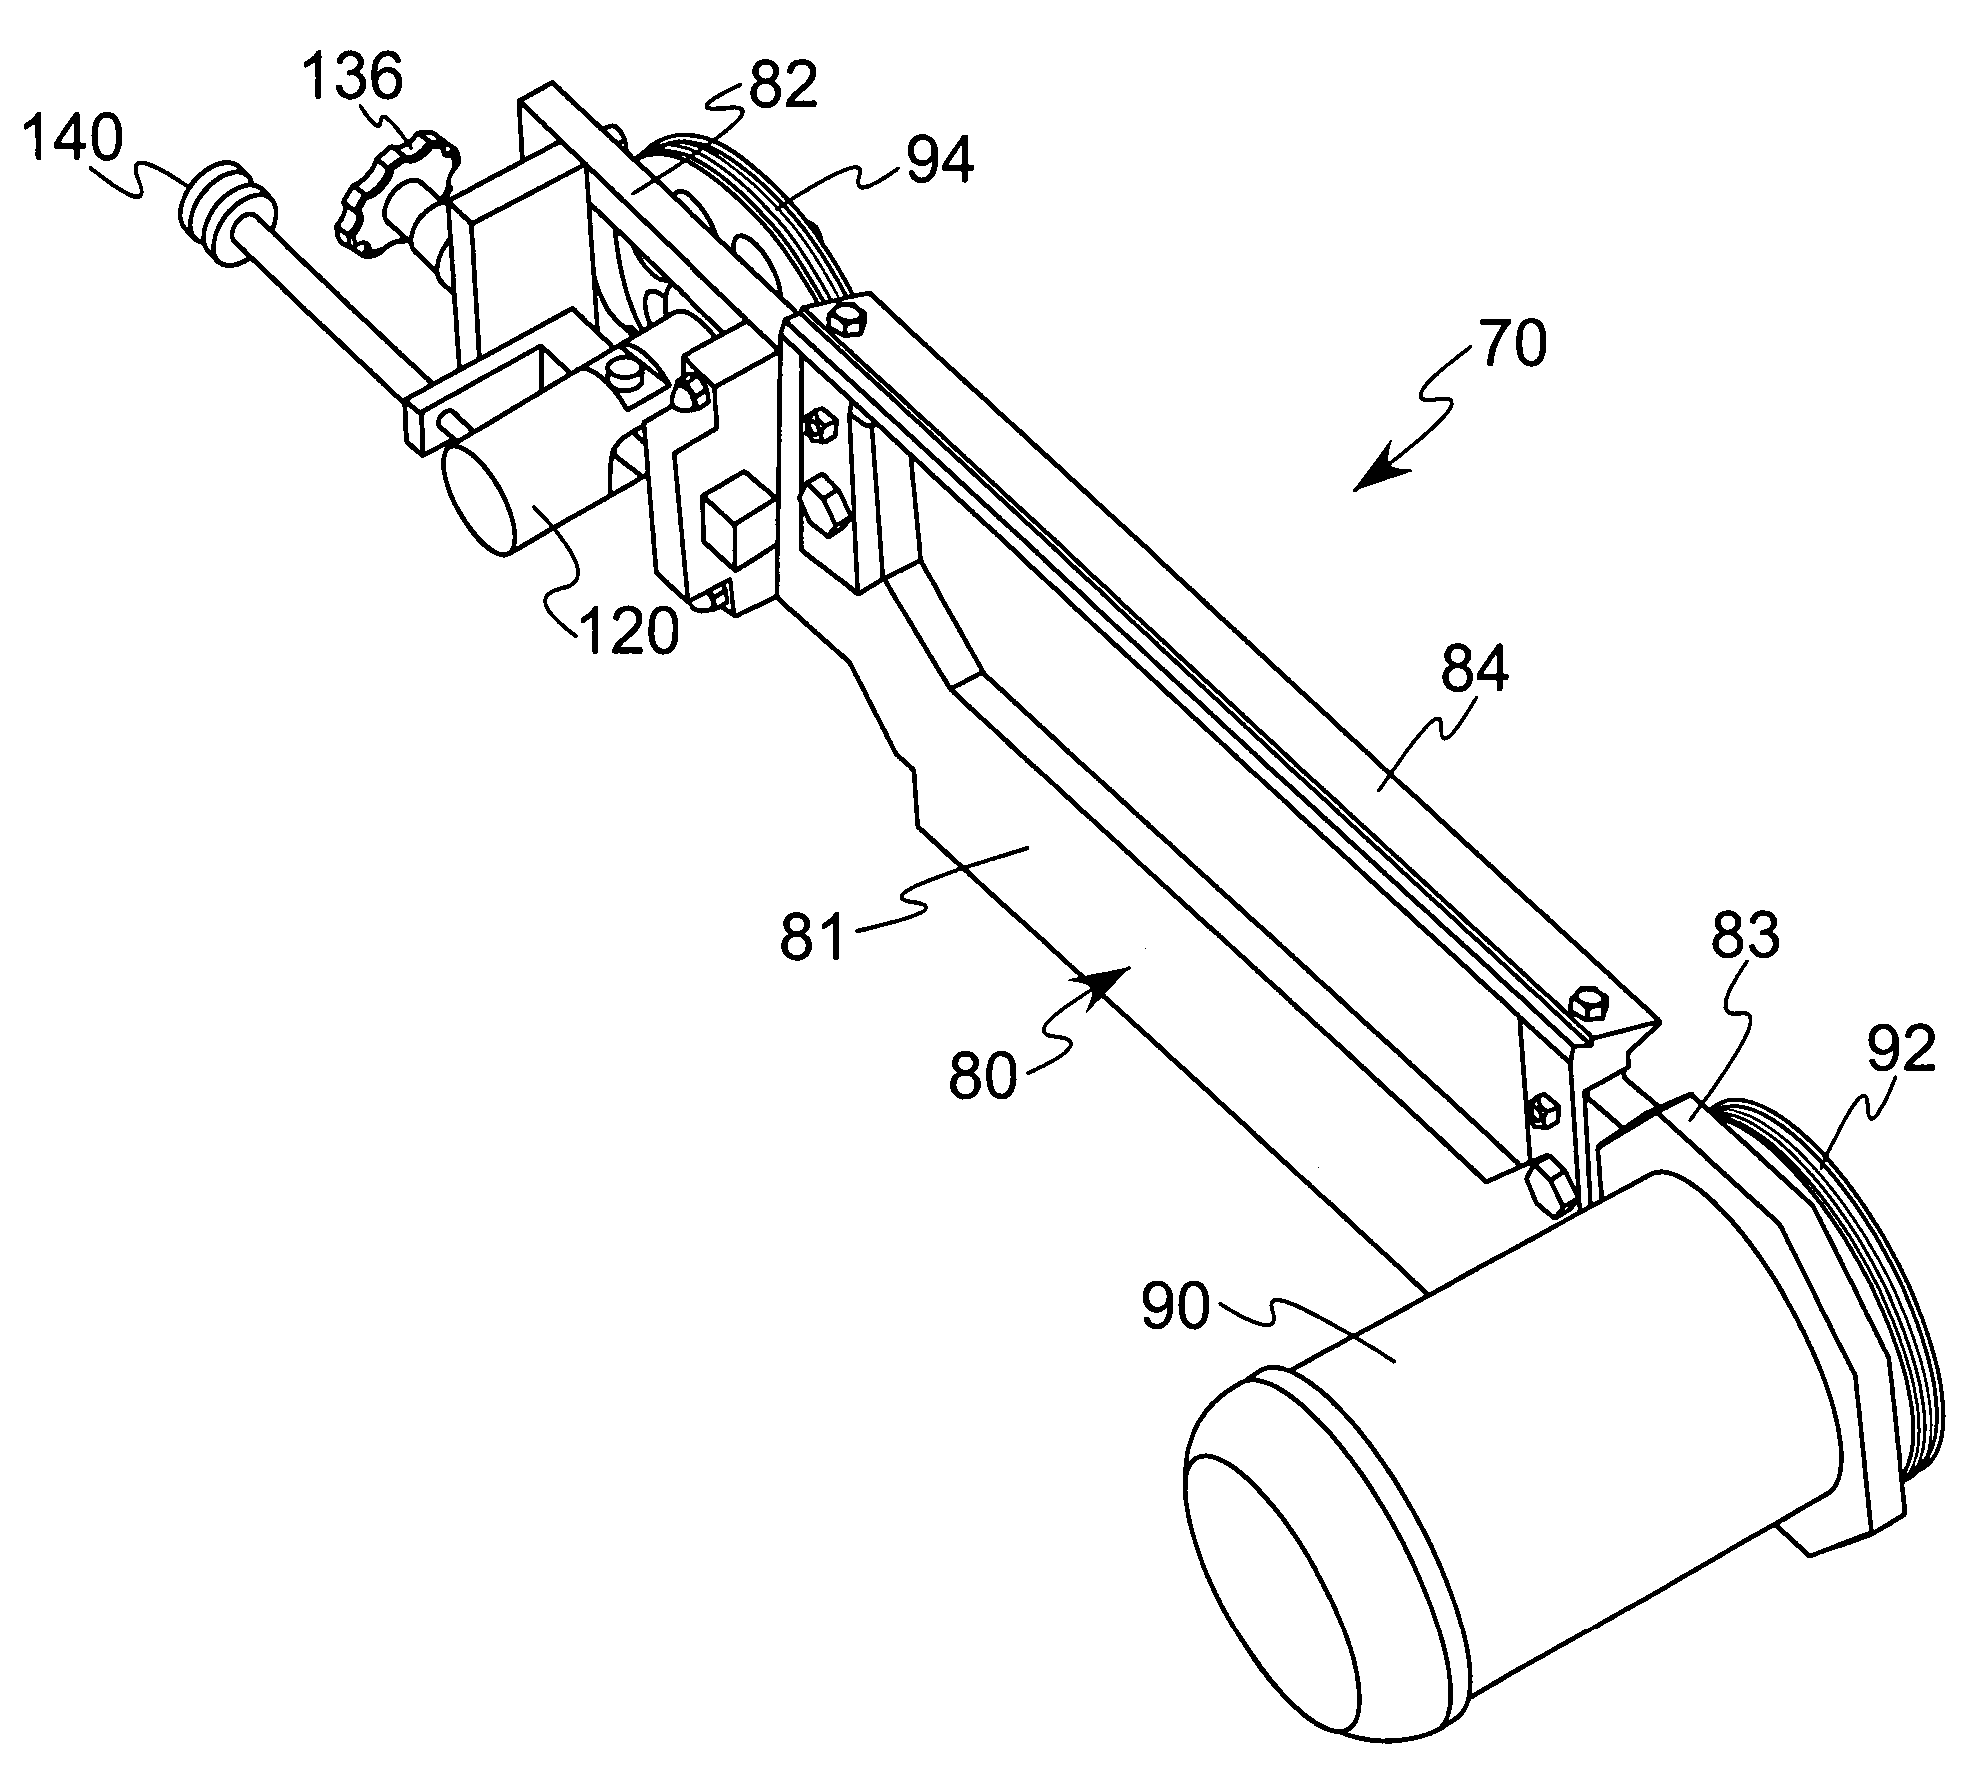 Drive mechanism and slicing apparatus for food slicing machine